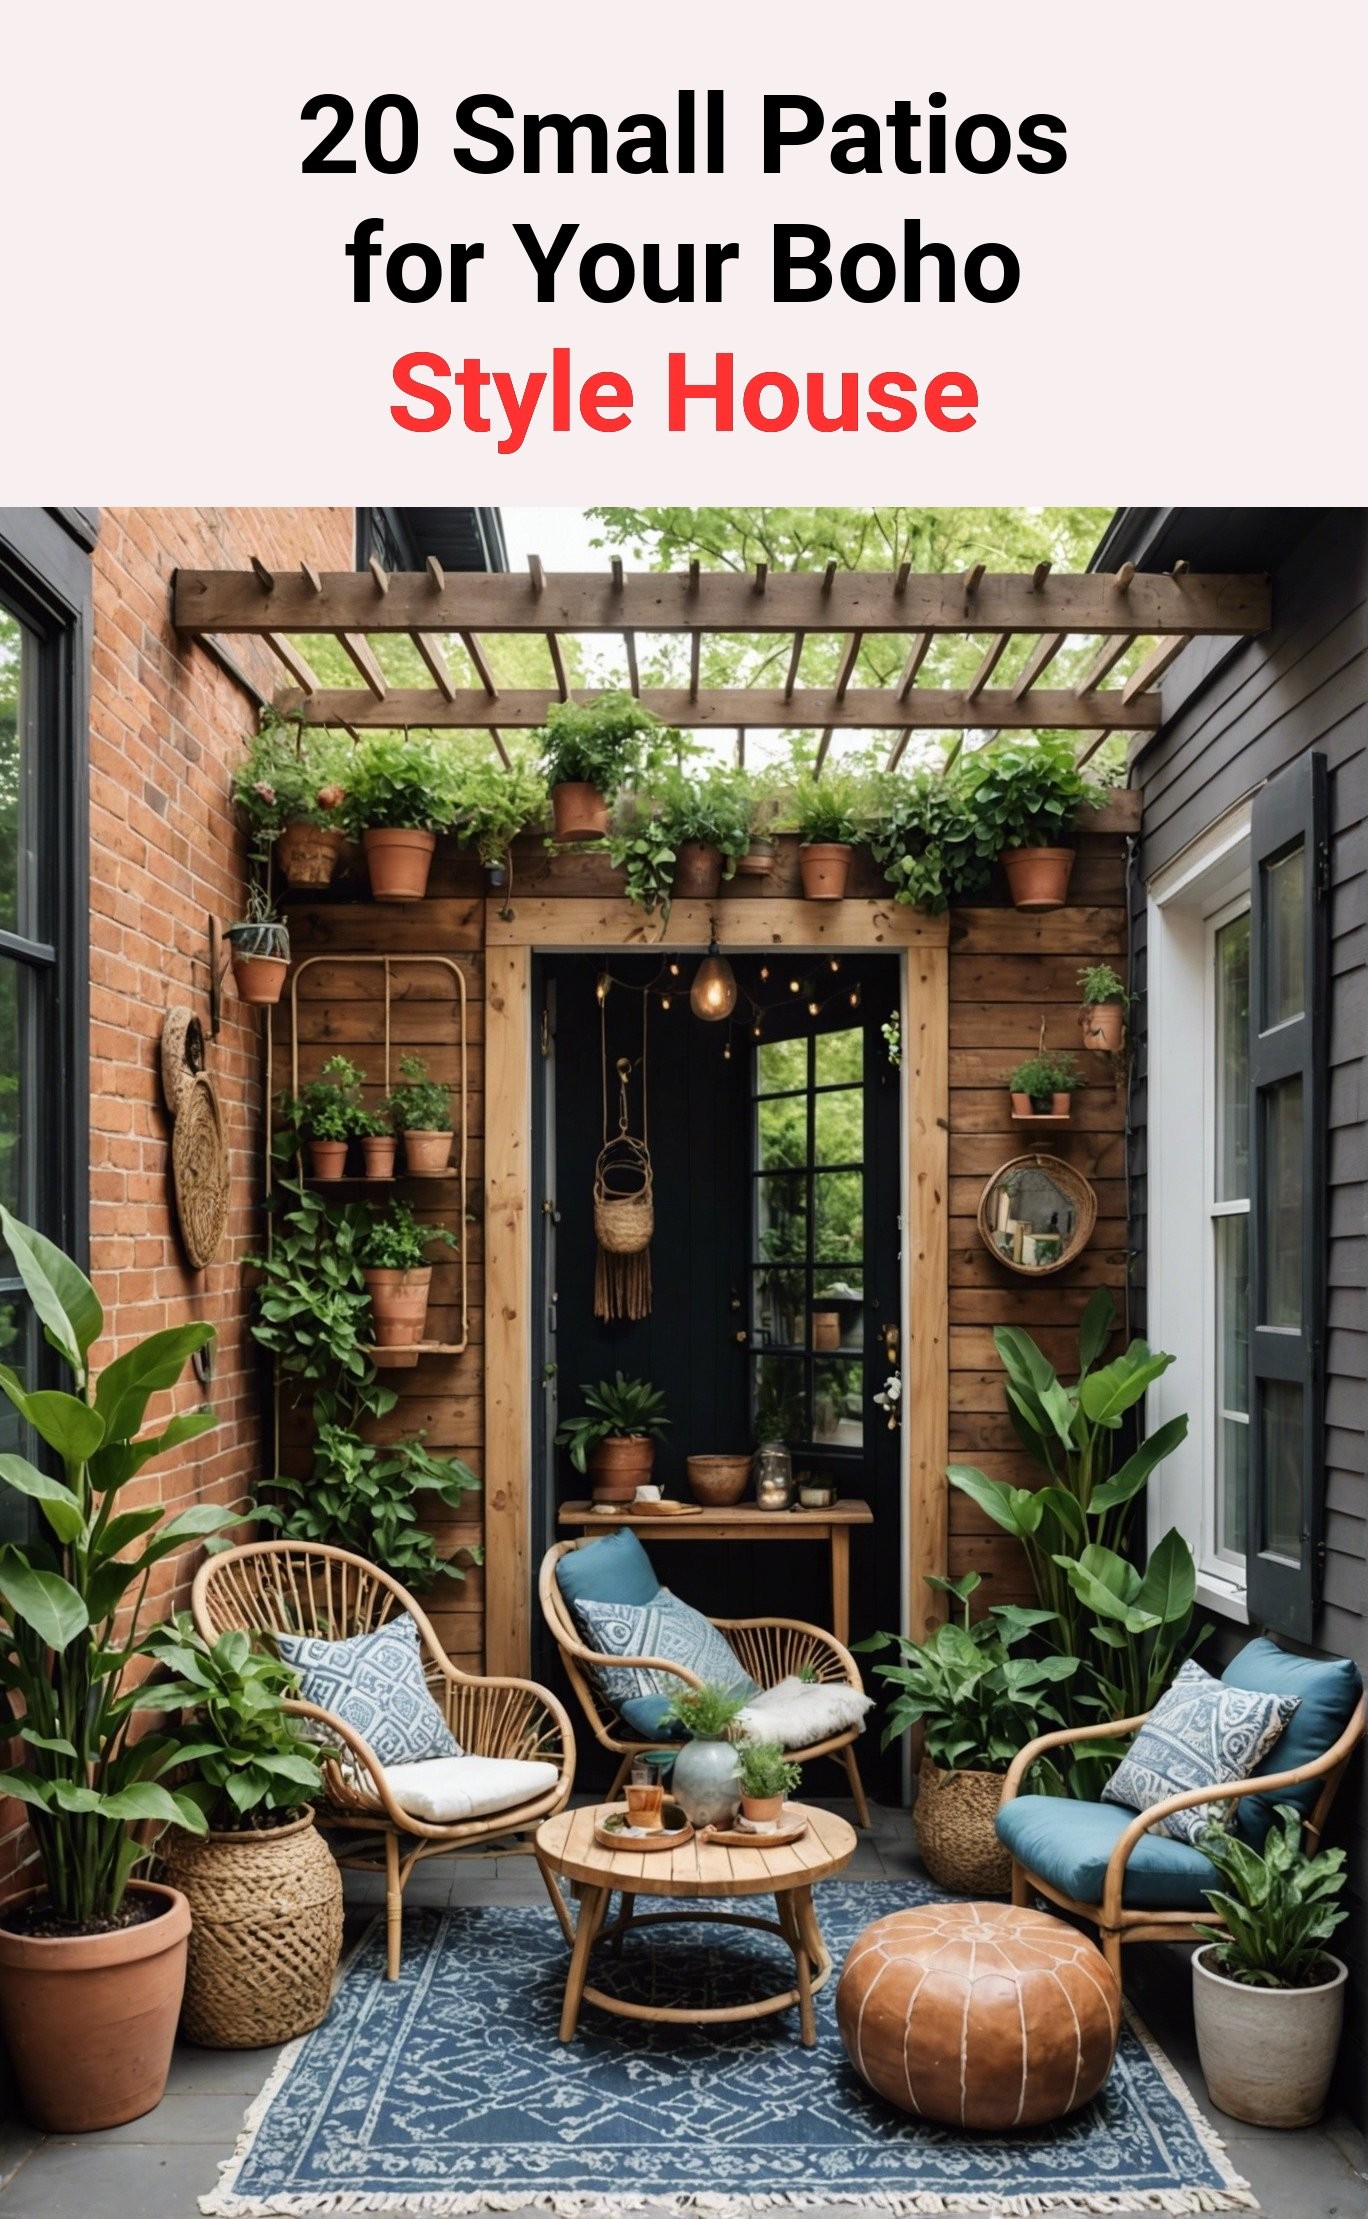 20 Small Patios for Your Boho Style House